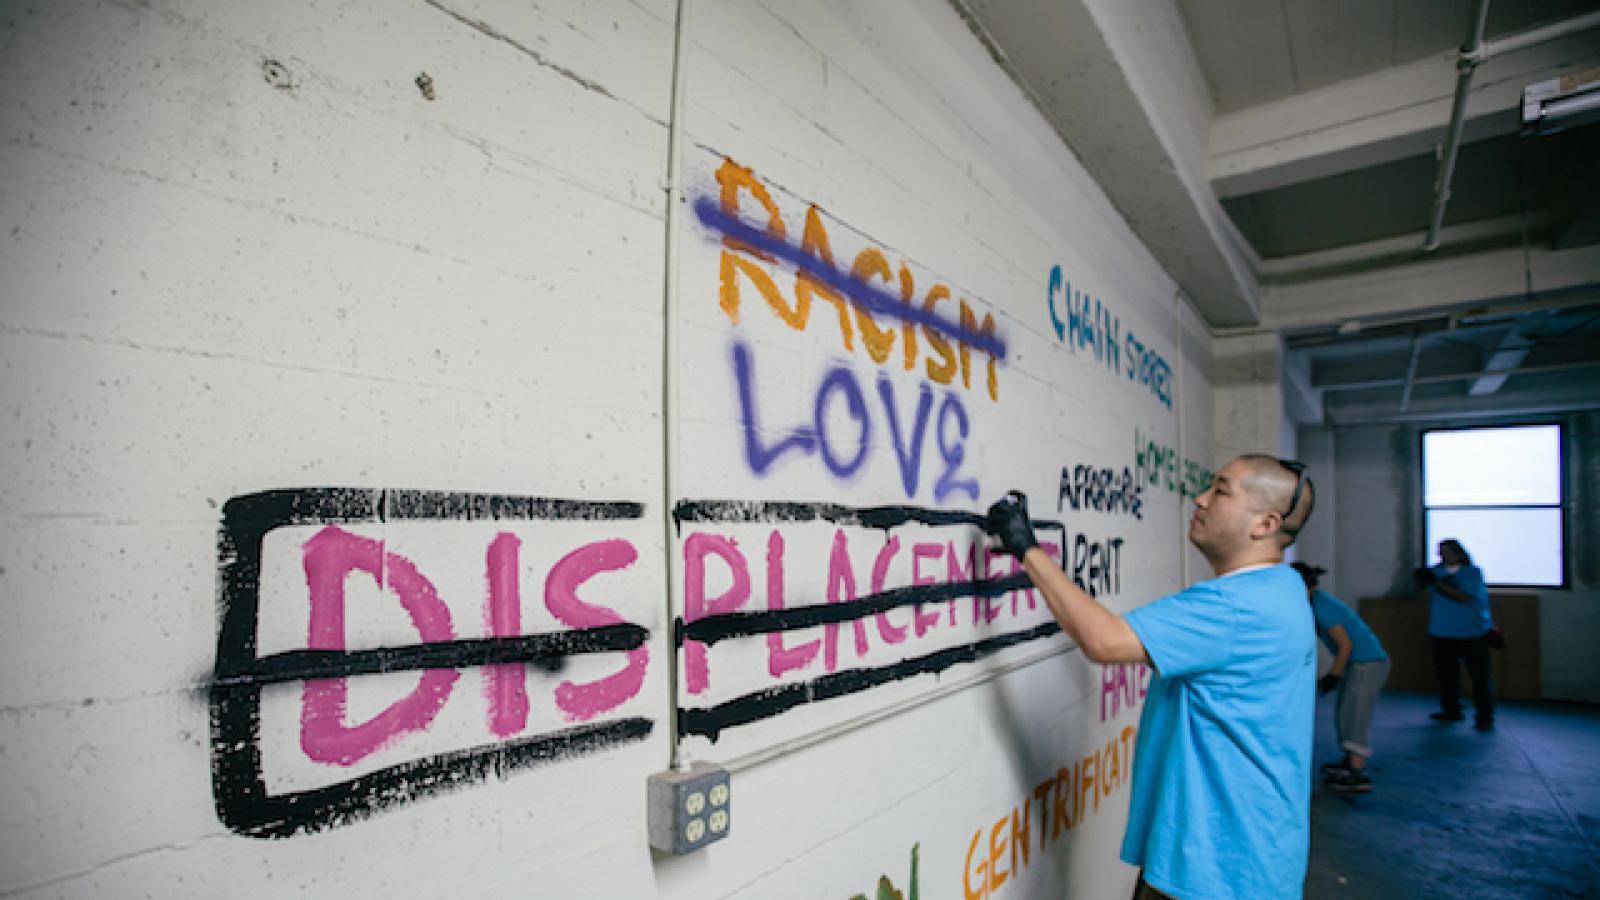 In a vacant space, artists spraypaint colorful text on a white cinderblock wall. Words include racism (crossed out), love, displacement crossed out, chain stores, homelessness, affordable rent, and gentrification.